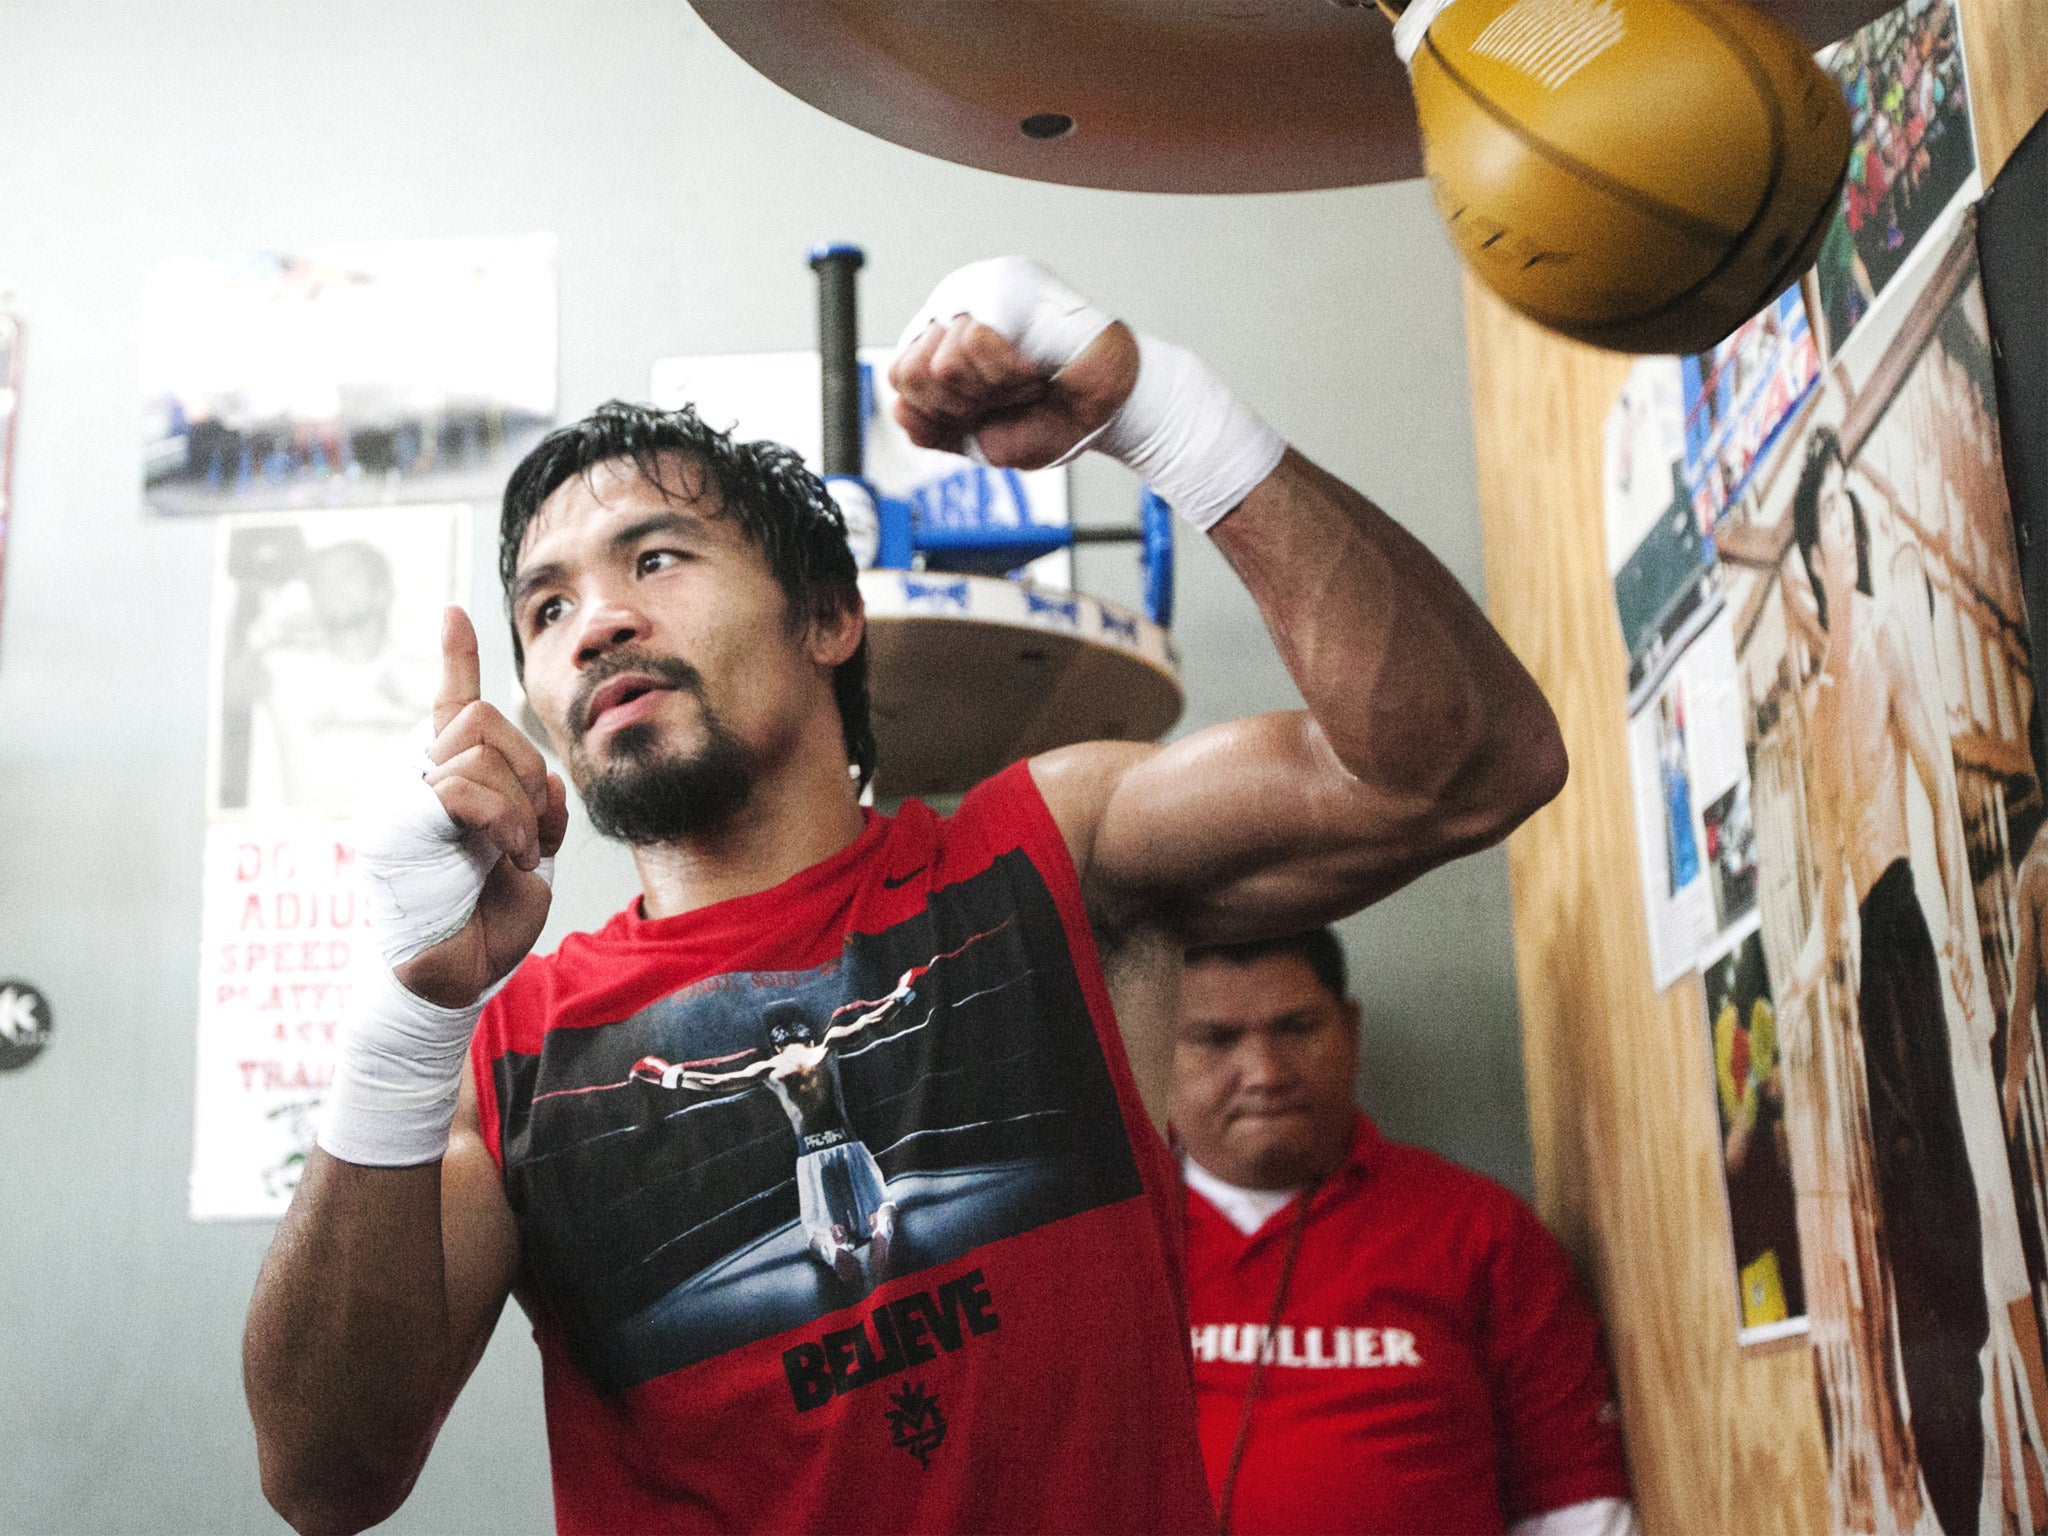 Manny Pacquiao trains in his Los Angeles gym